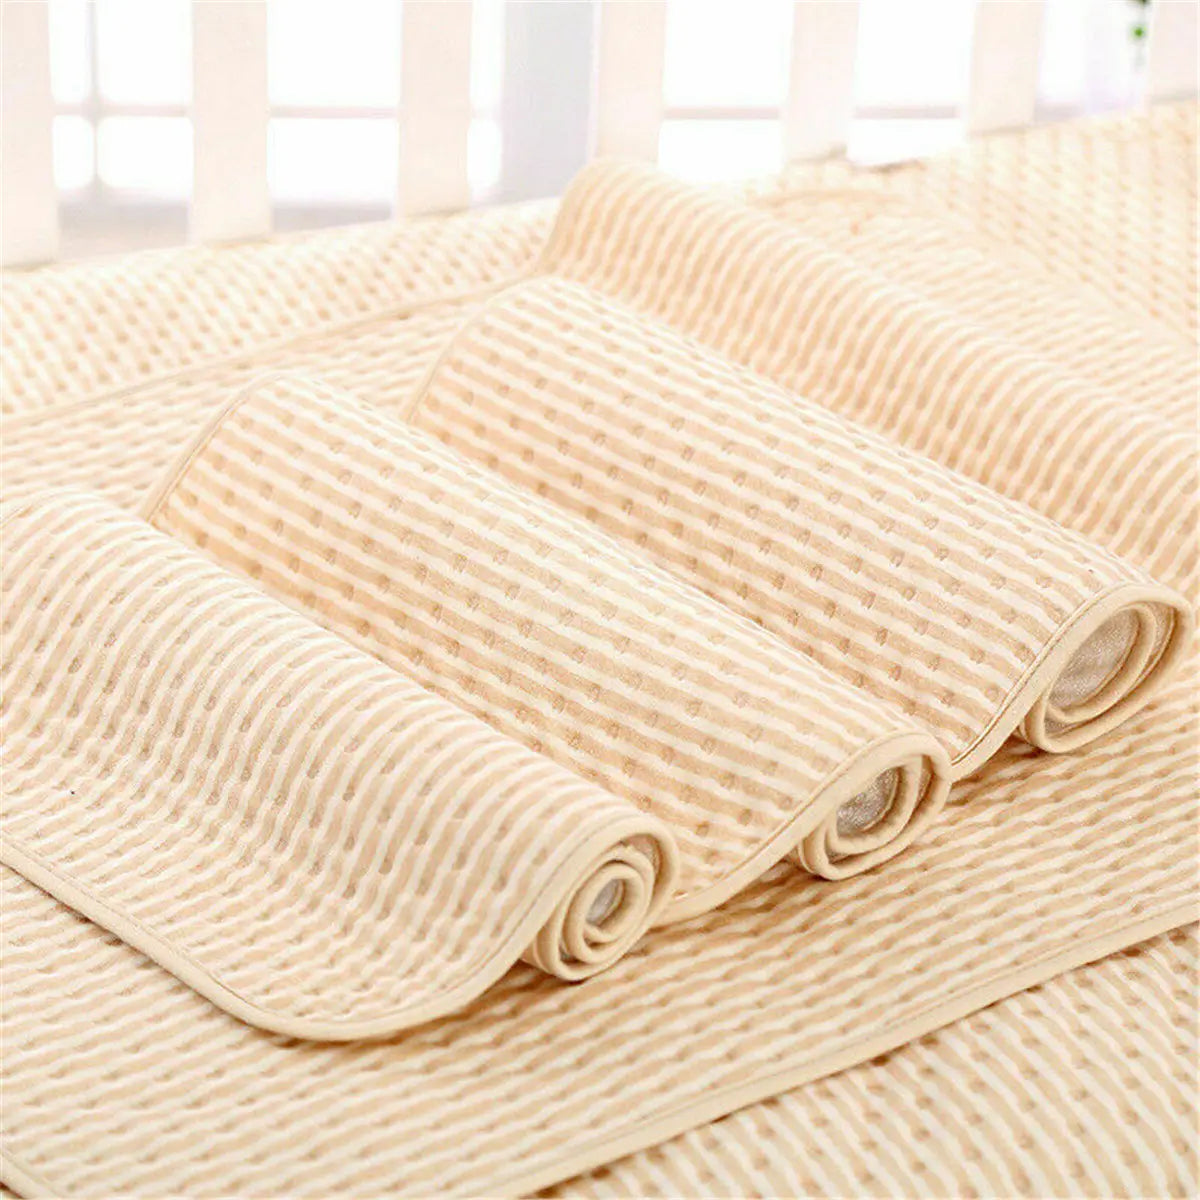 Washable Waterproof Incontinence Bed Pad Elderly Kids